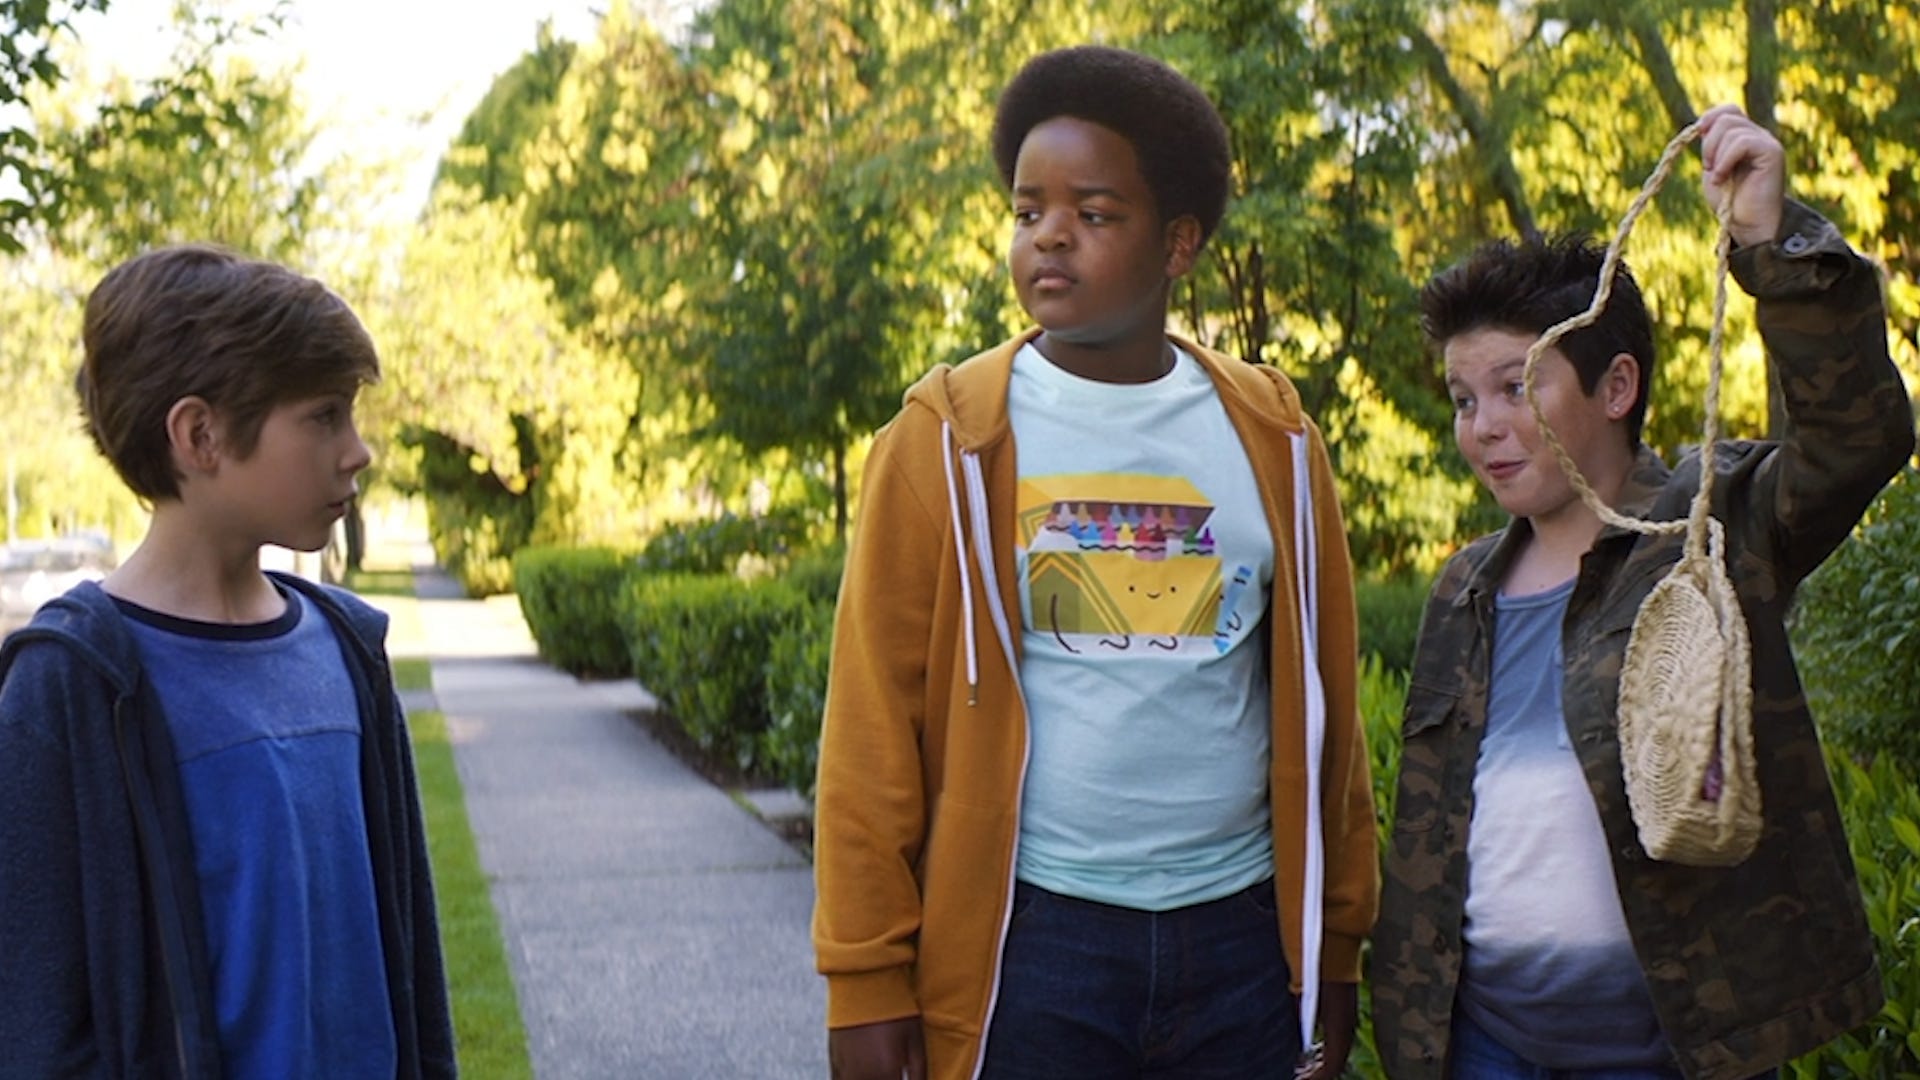 6th Grade Sex - Three boys know how to get into trouble in 'Good Boys' trailer